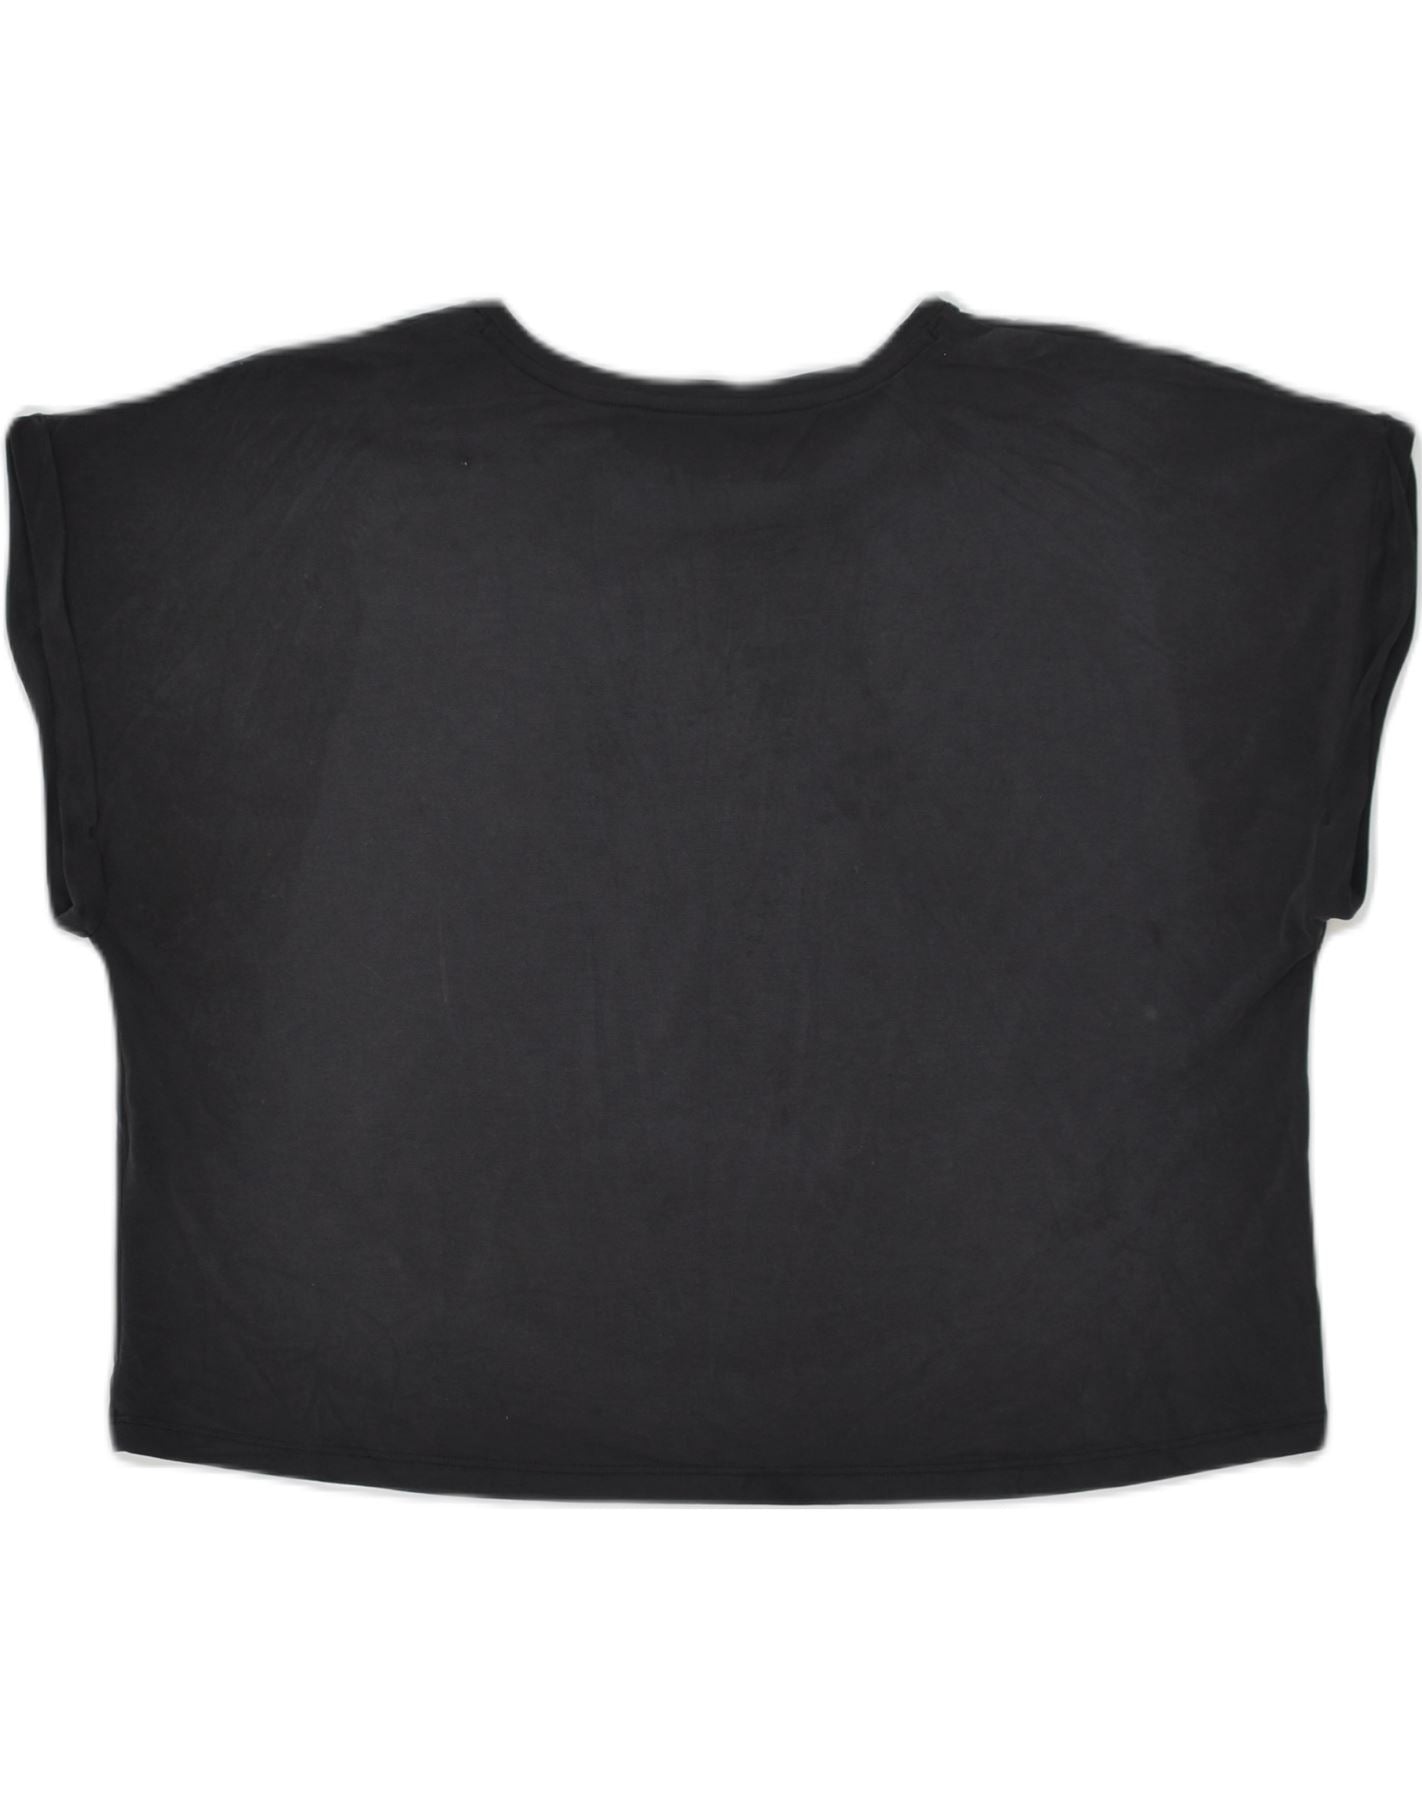 UNDER ARMOUR Womens Crop Graphic T-Shirt Top UK 16 Large Black